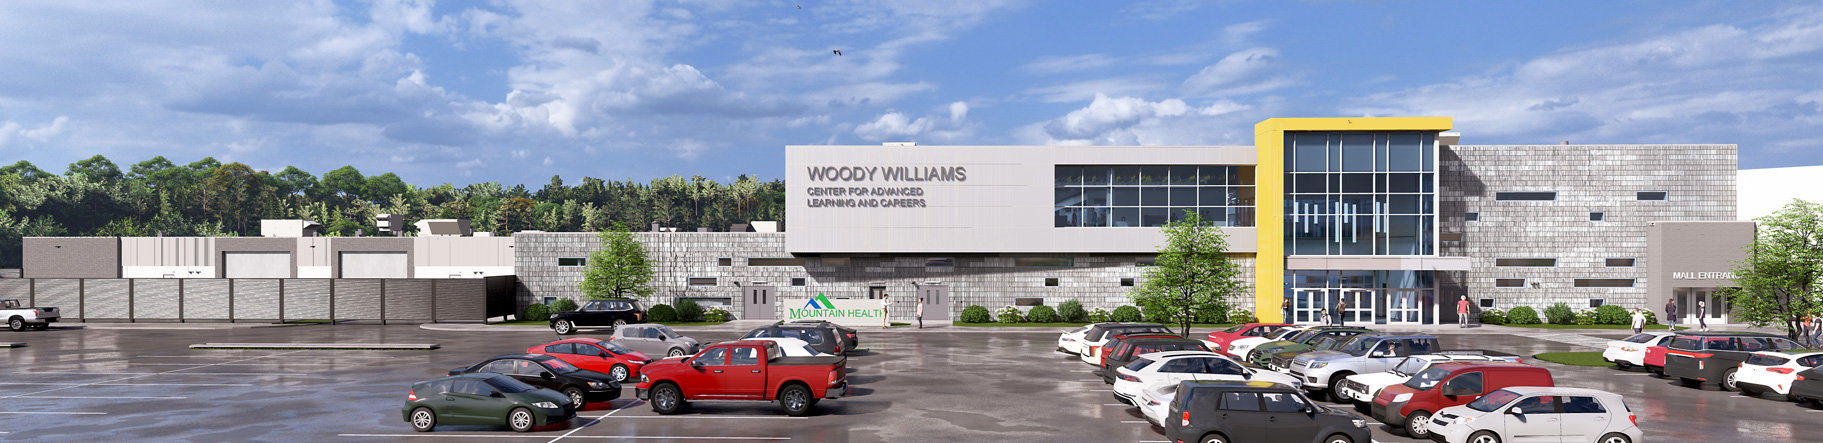 Woody Williams Center for Advanced Learning & Careers